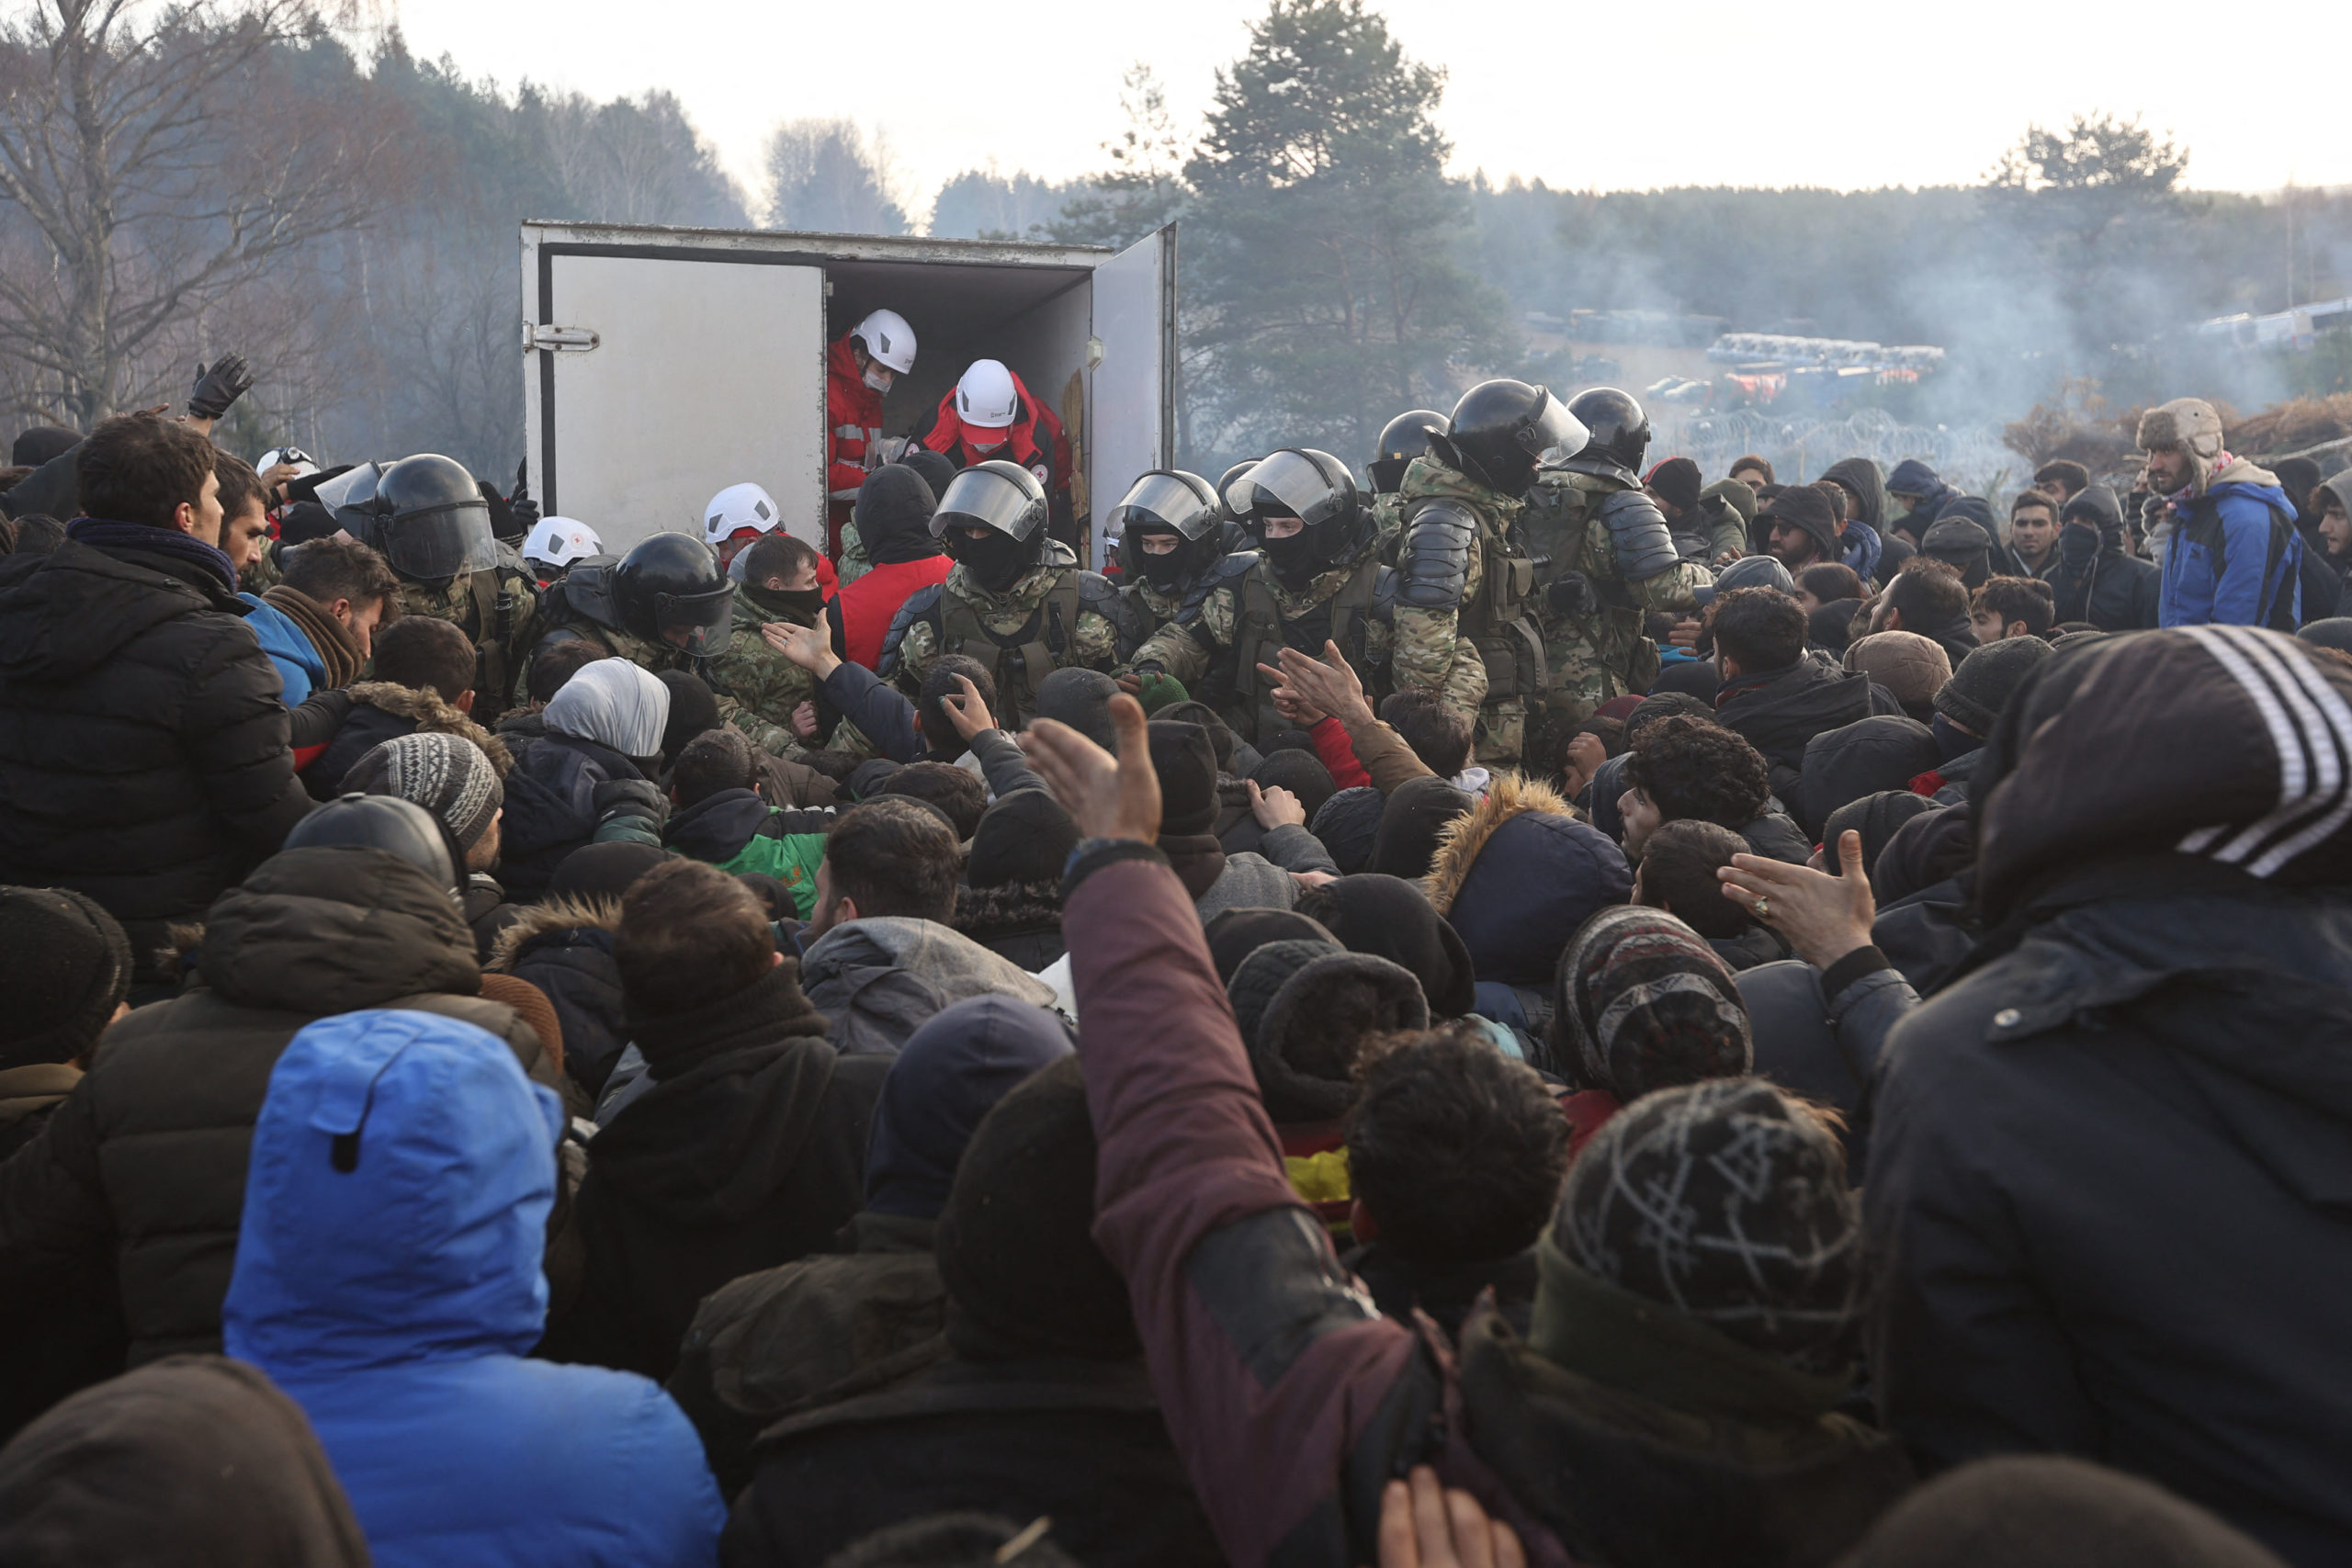 Migrants gather to receive humanitarian aid in a camp on the Belarusian-Polish border in the Grodno region on November 12, 2021. (Photo by RAMIL NASIBULIN/BELTA/AFP via Getty Images)